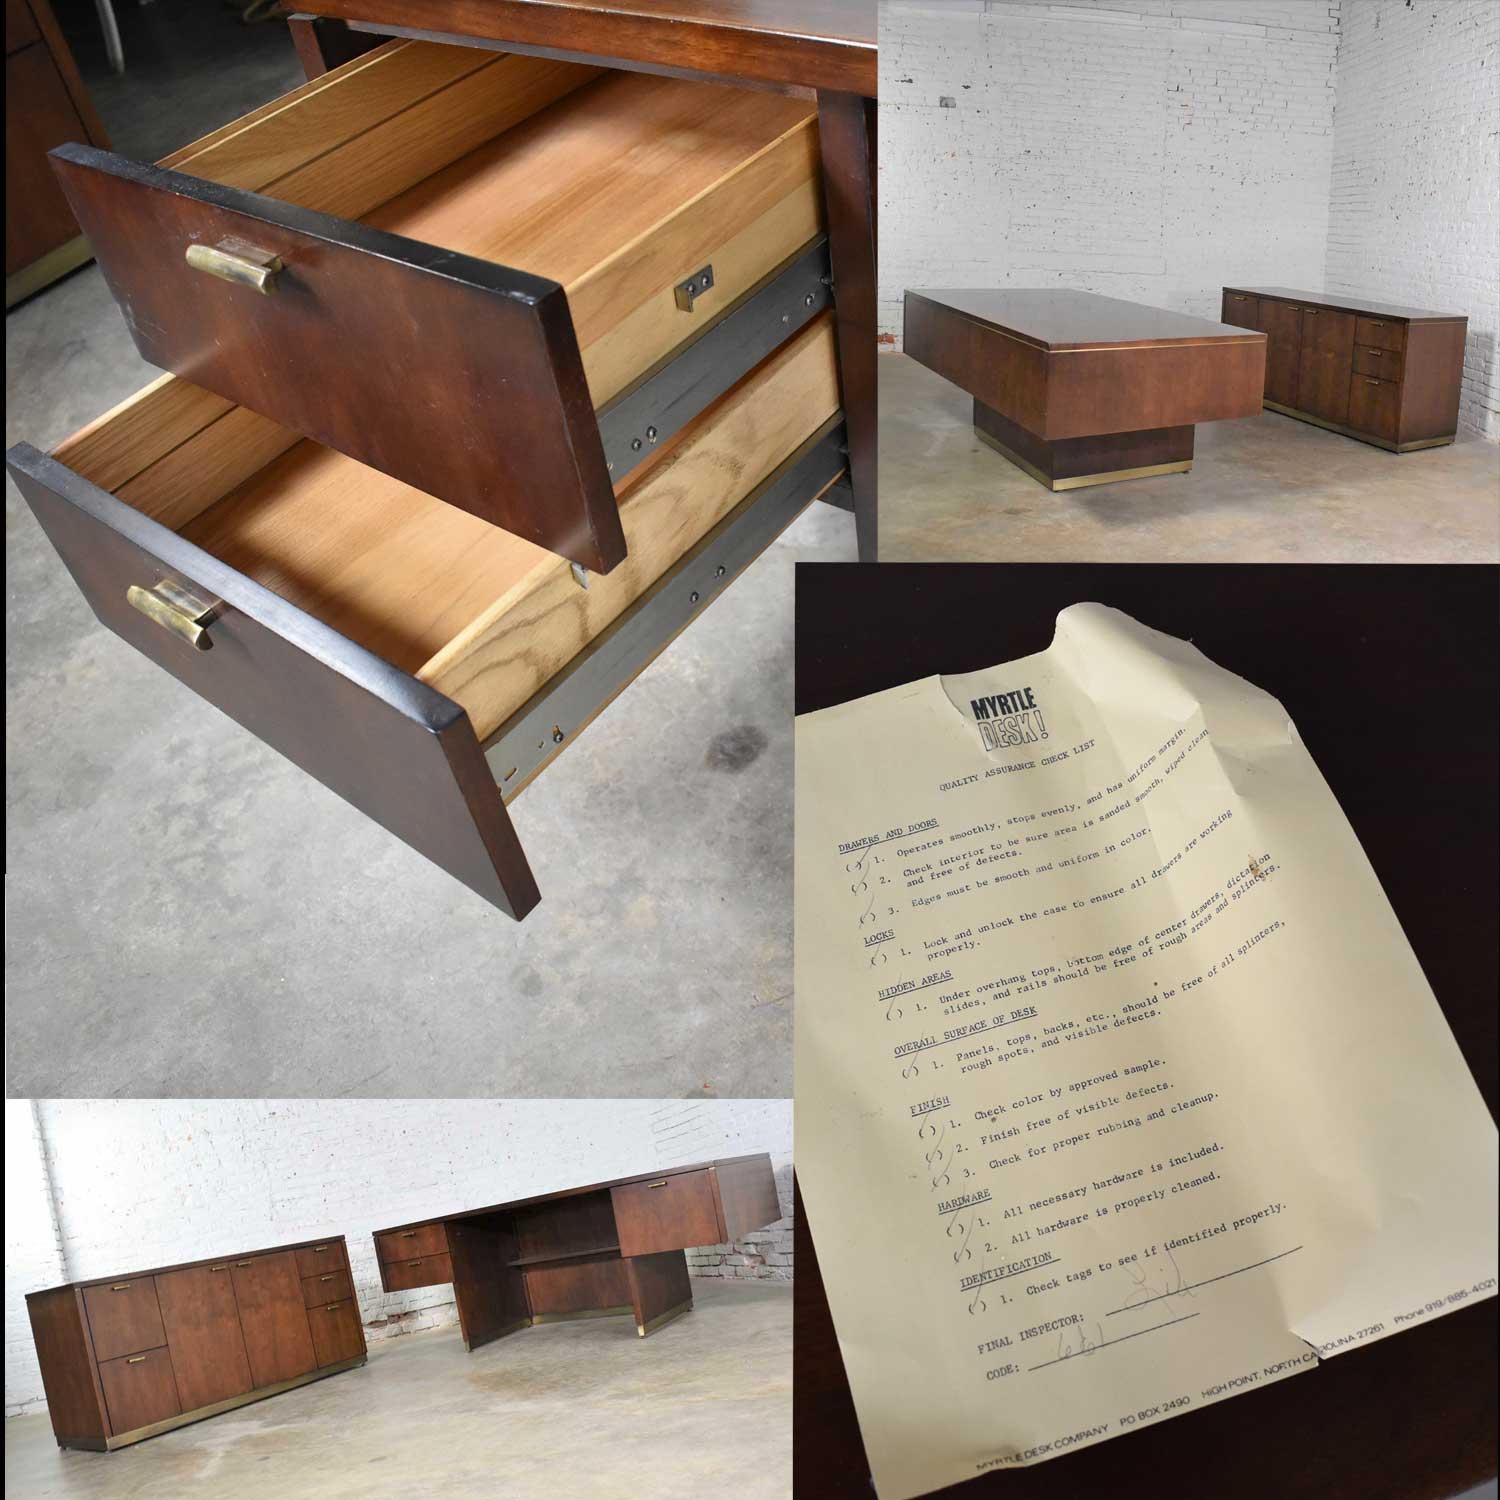 20th Century Large Mid-Century Modern Cantilever Executive Desk & Credenza by Myrtle Desk Co.